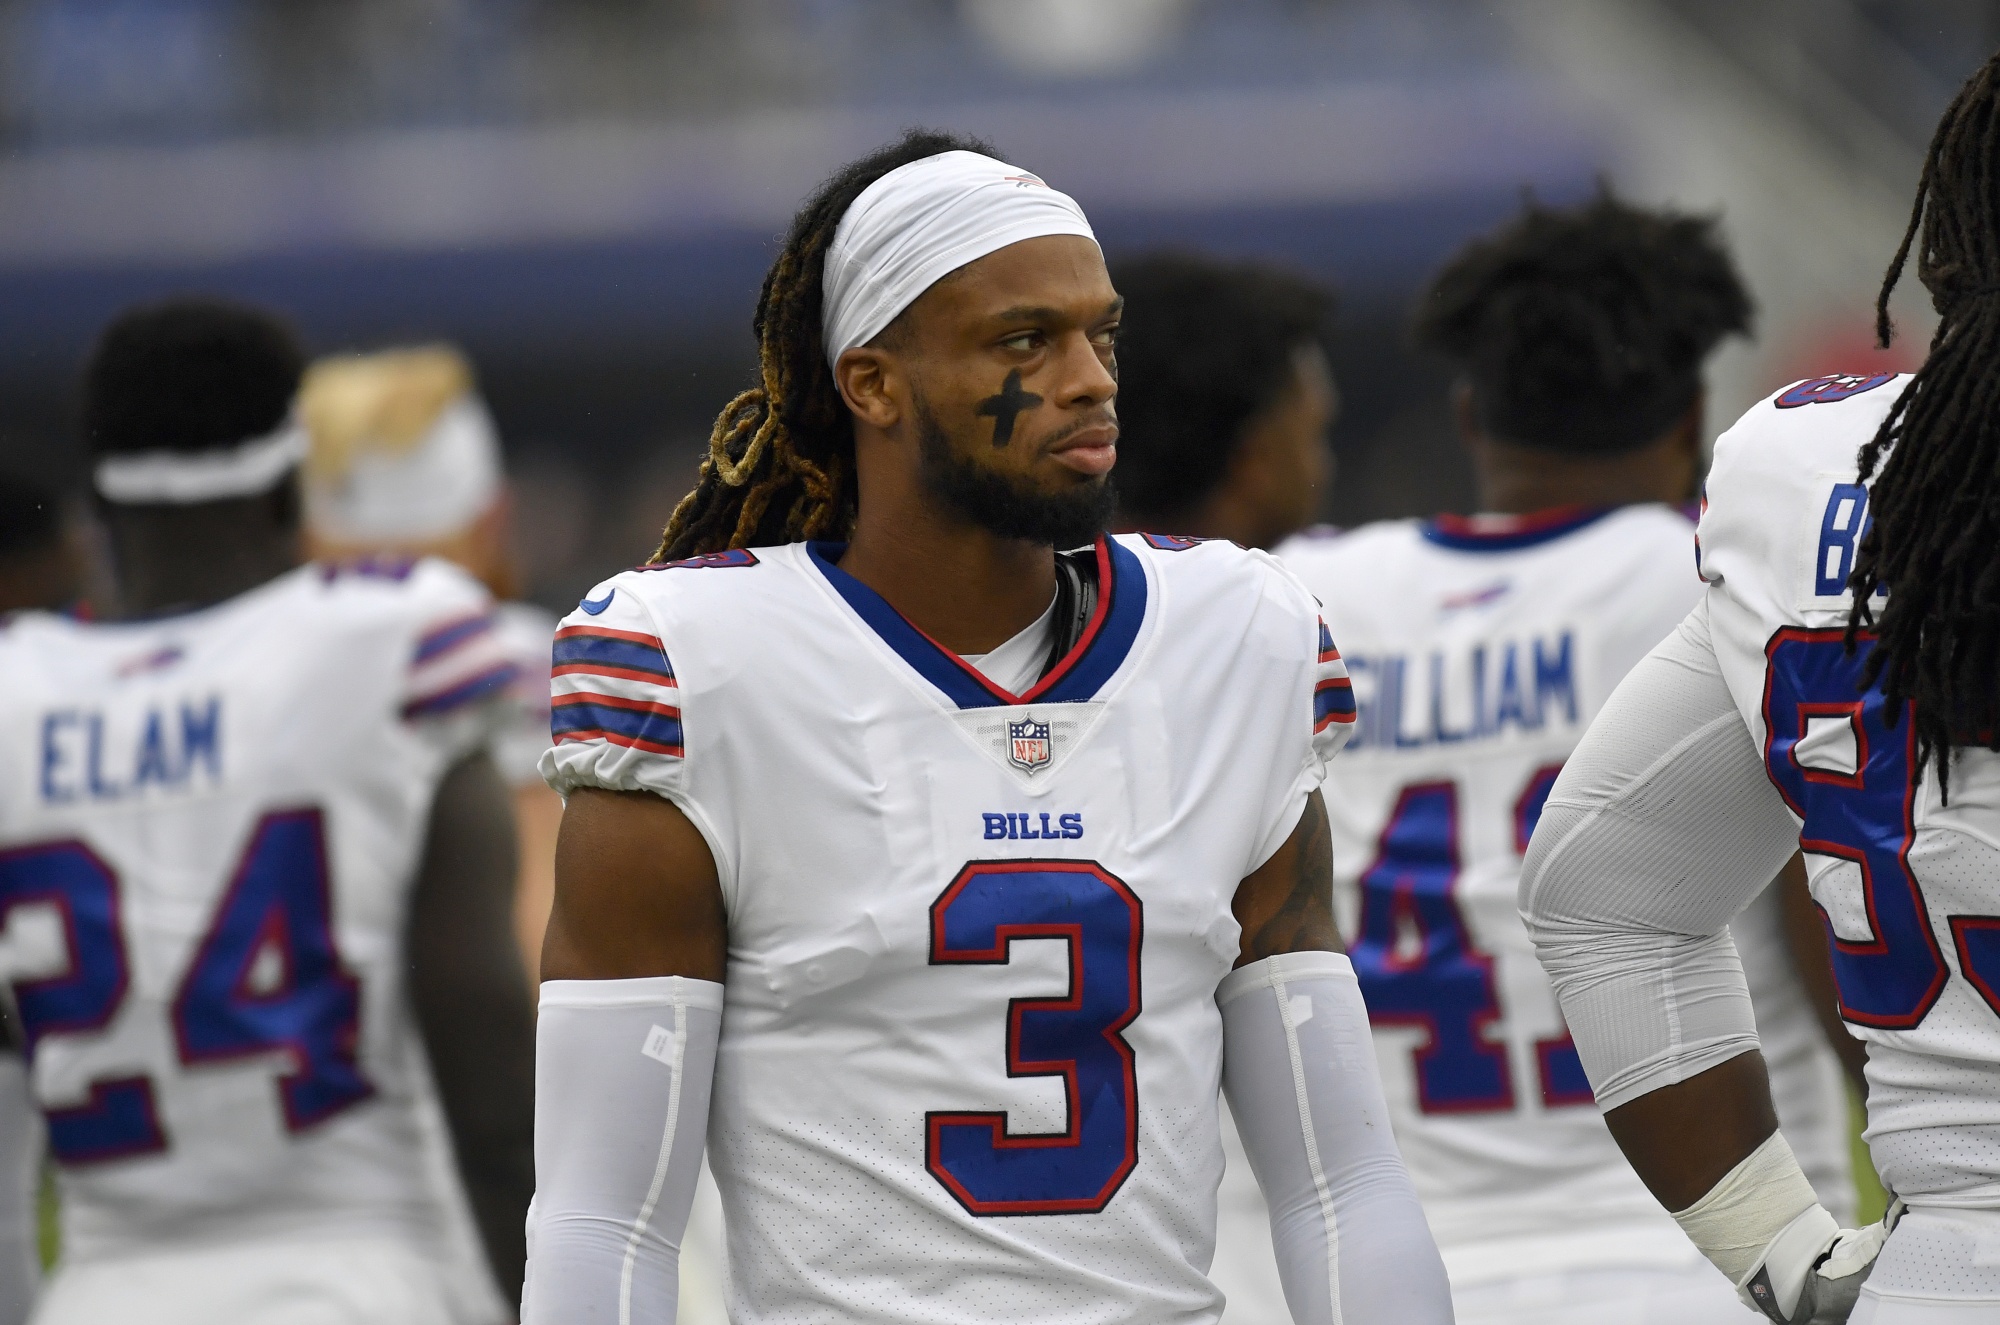 Damar Hamlin injured after hit: What to know about Buffalo Bills player